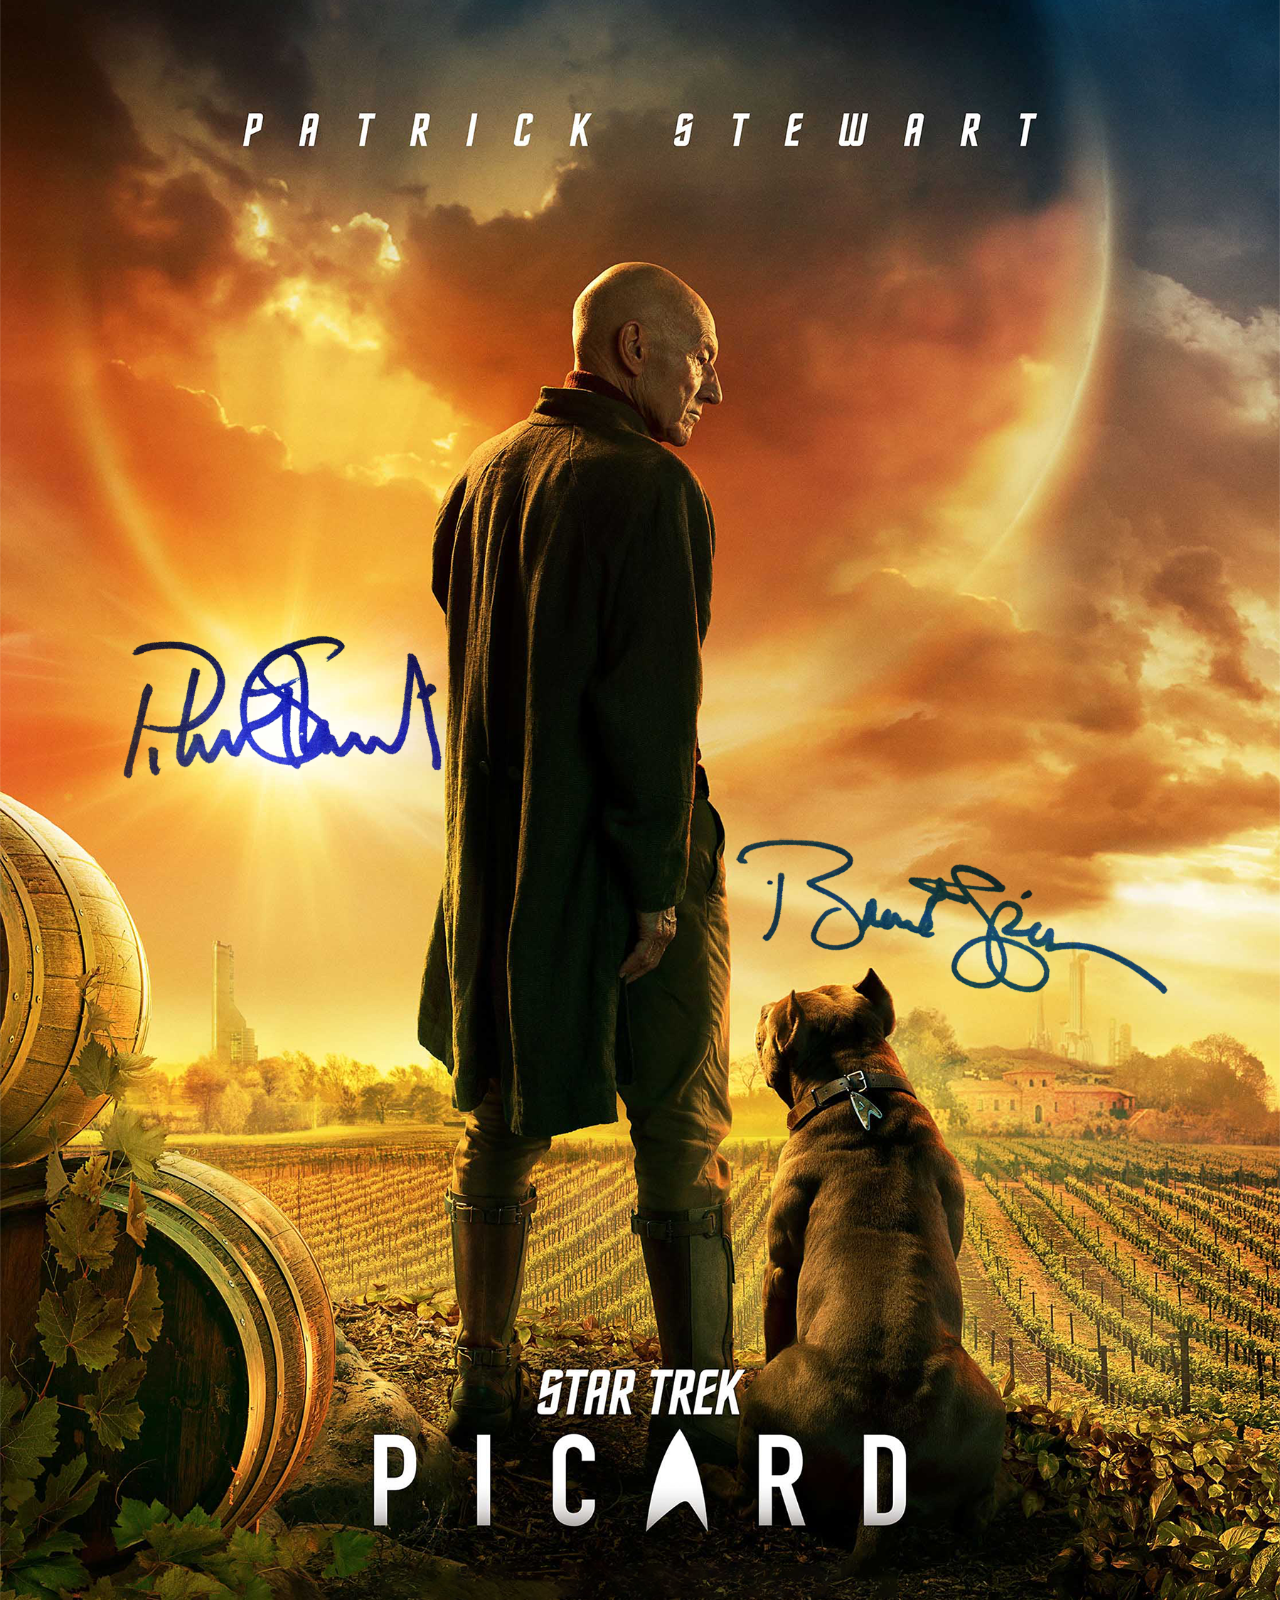 Star Trek Picard signed Patrick Stewart 8X10 Photo Poster painting picture poster autograph RP